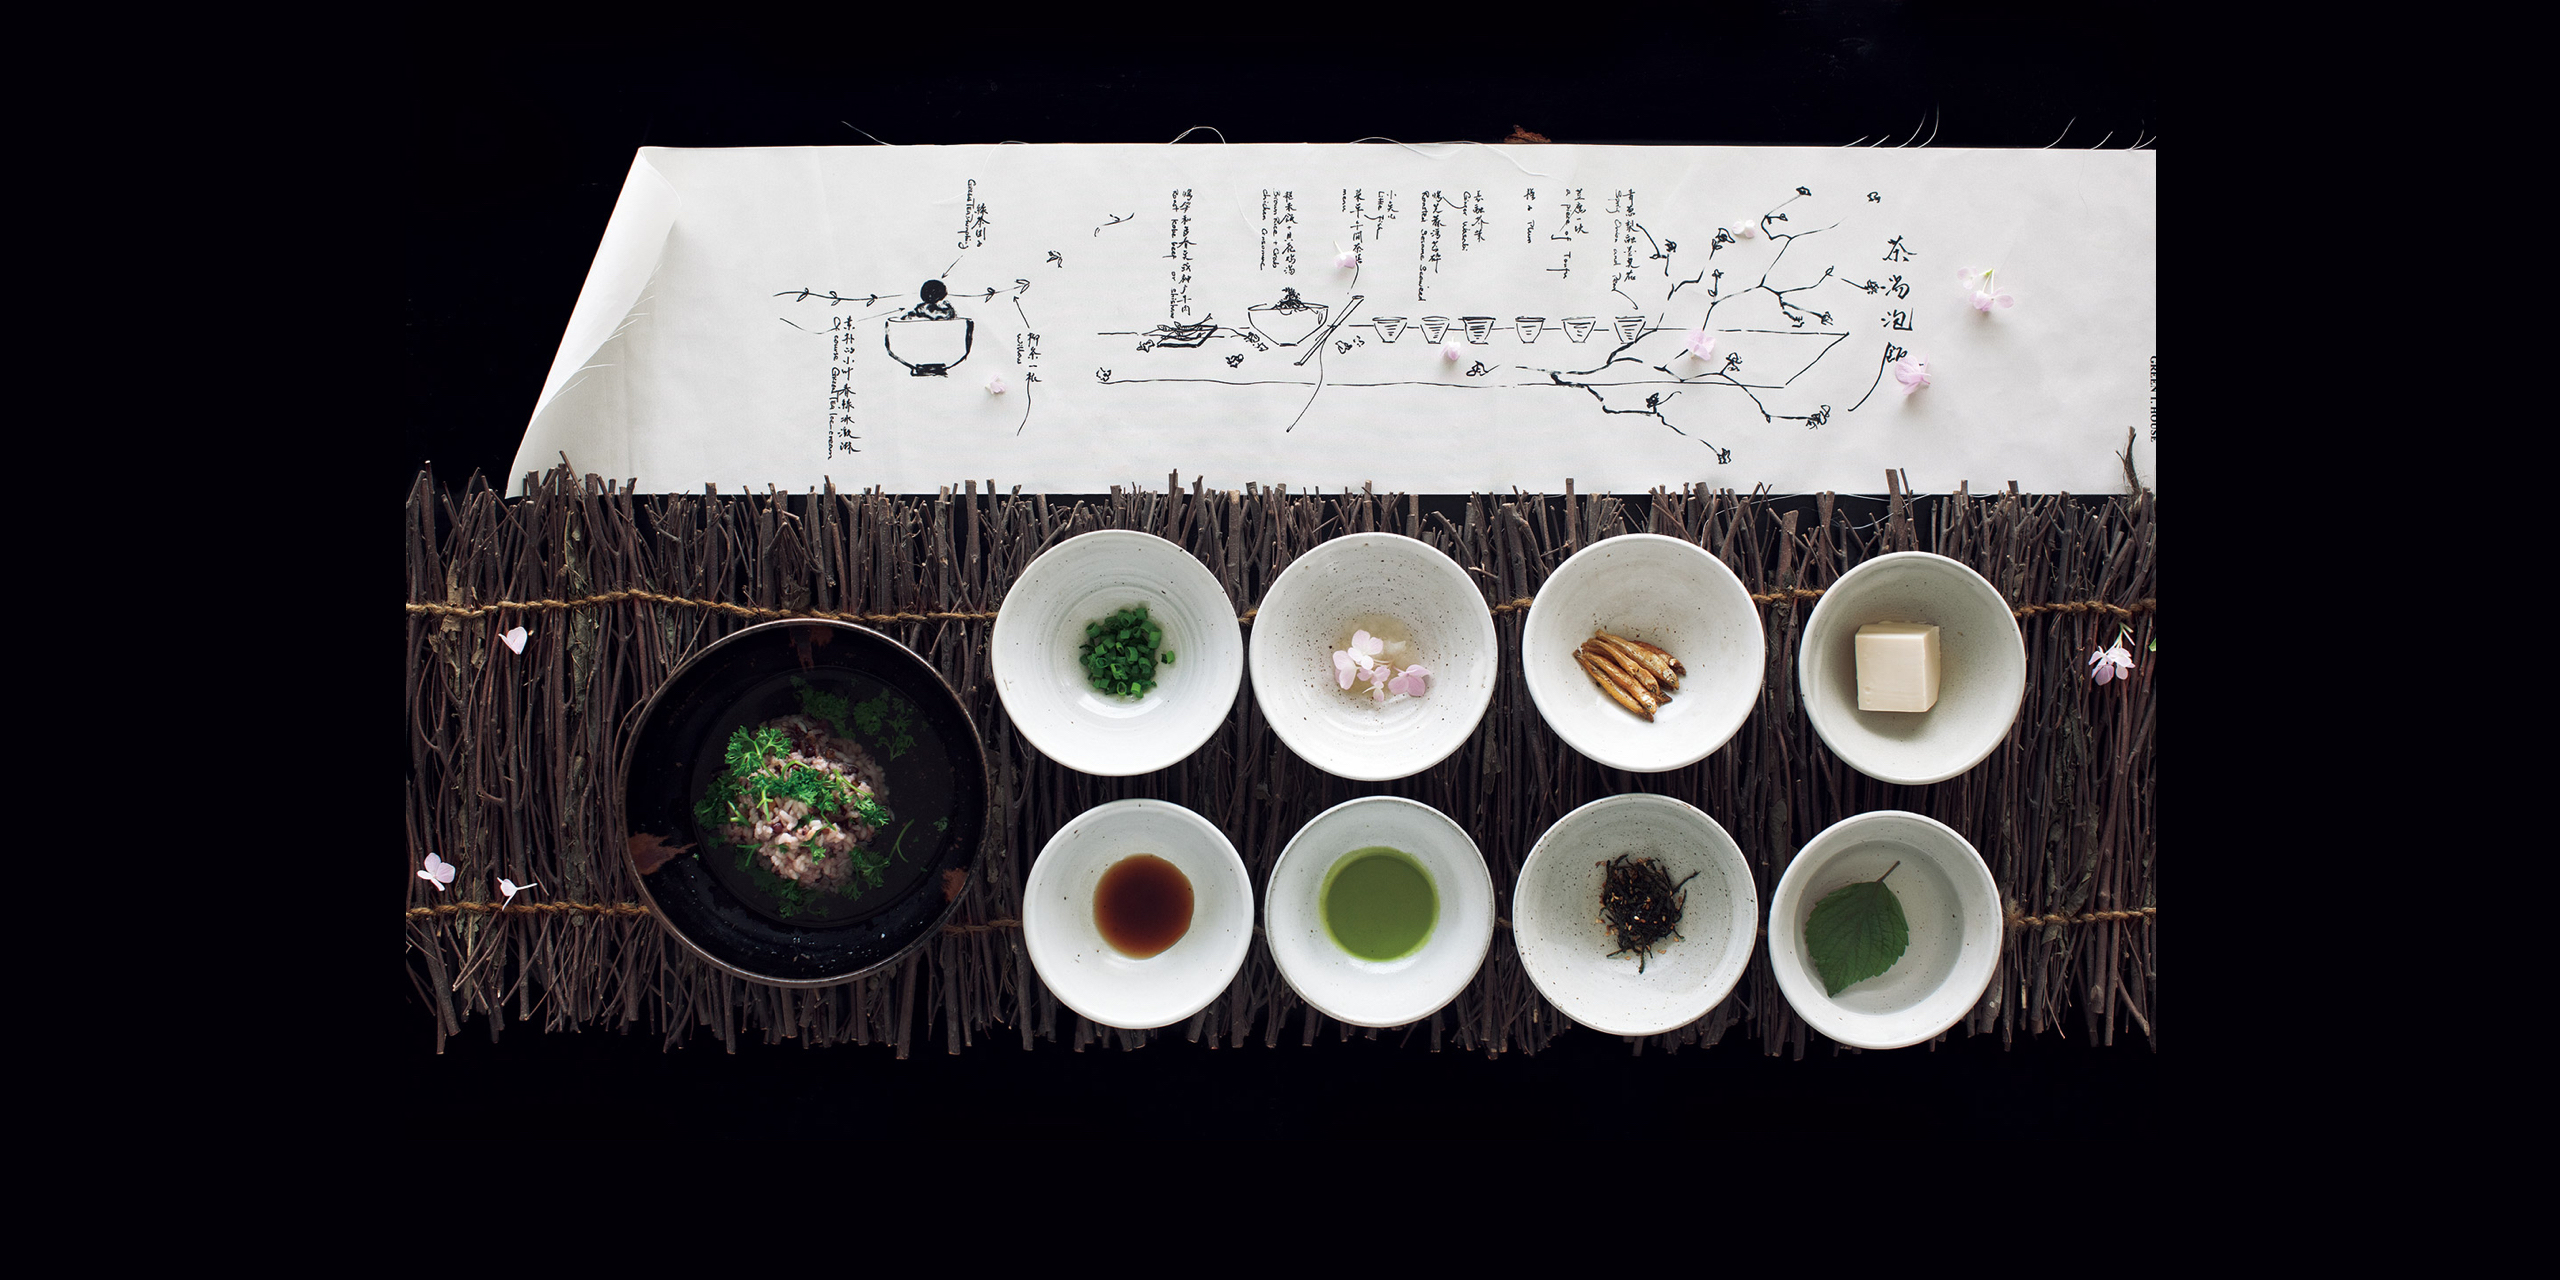 The beneficial properties of gourmet congee served at Green T. House...